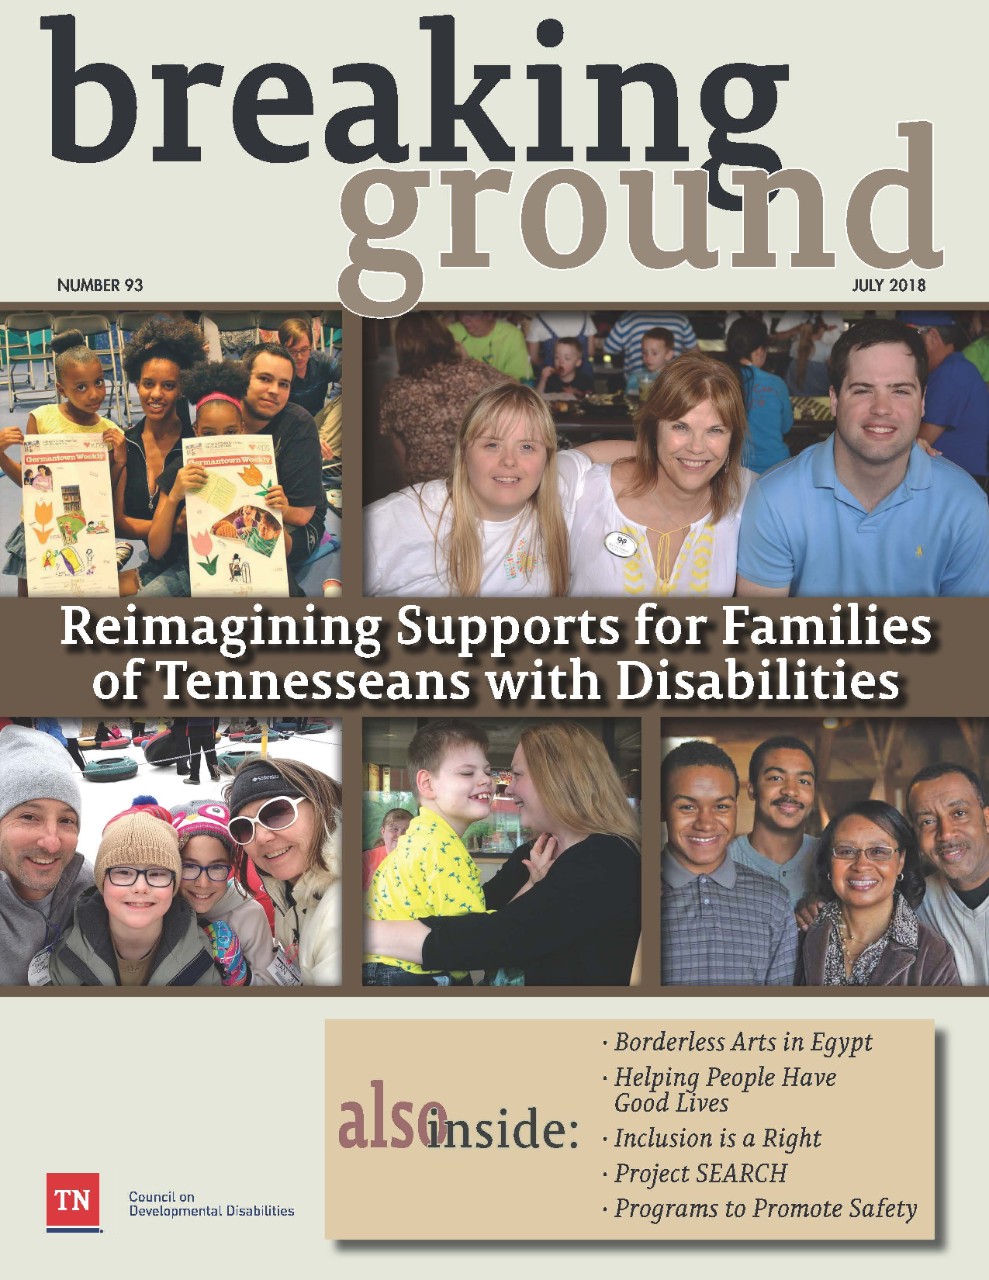 The cover of Breaking Ground issue #93 has multiple photos of Tennessee families that experience disability. The first photo is of a family that consists of a mom, a dad and two young daughters. Both little girls are holding up newspapers. Next photo shows three very happy people, a daughter, a mom and a son. They appear to be at some kind of conference. The next photo shows a family of four, dad, mom and two children, all bundled up with caps and warm coats in the middle of winter. The next photo shows a mom and her son holding each other, smiling, looking into each other’s faces. The last photo shows another family of four, mom, dad and two tall sons. There is a banner across the middle of the cover that reads, “Reimagining Supports for Families of Tennesseans with disabilities. There is also a box on the bottom that shows what other articles are featured in the magazine, including Borderless Arts in Egypt; Helping People Have Good Lives; Inclusion is a Right; Project Search; and Programs to Promote Safety.